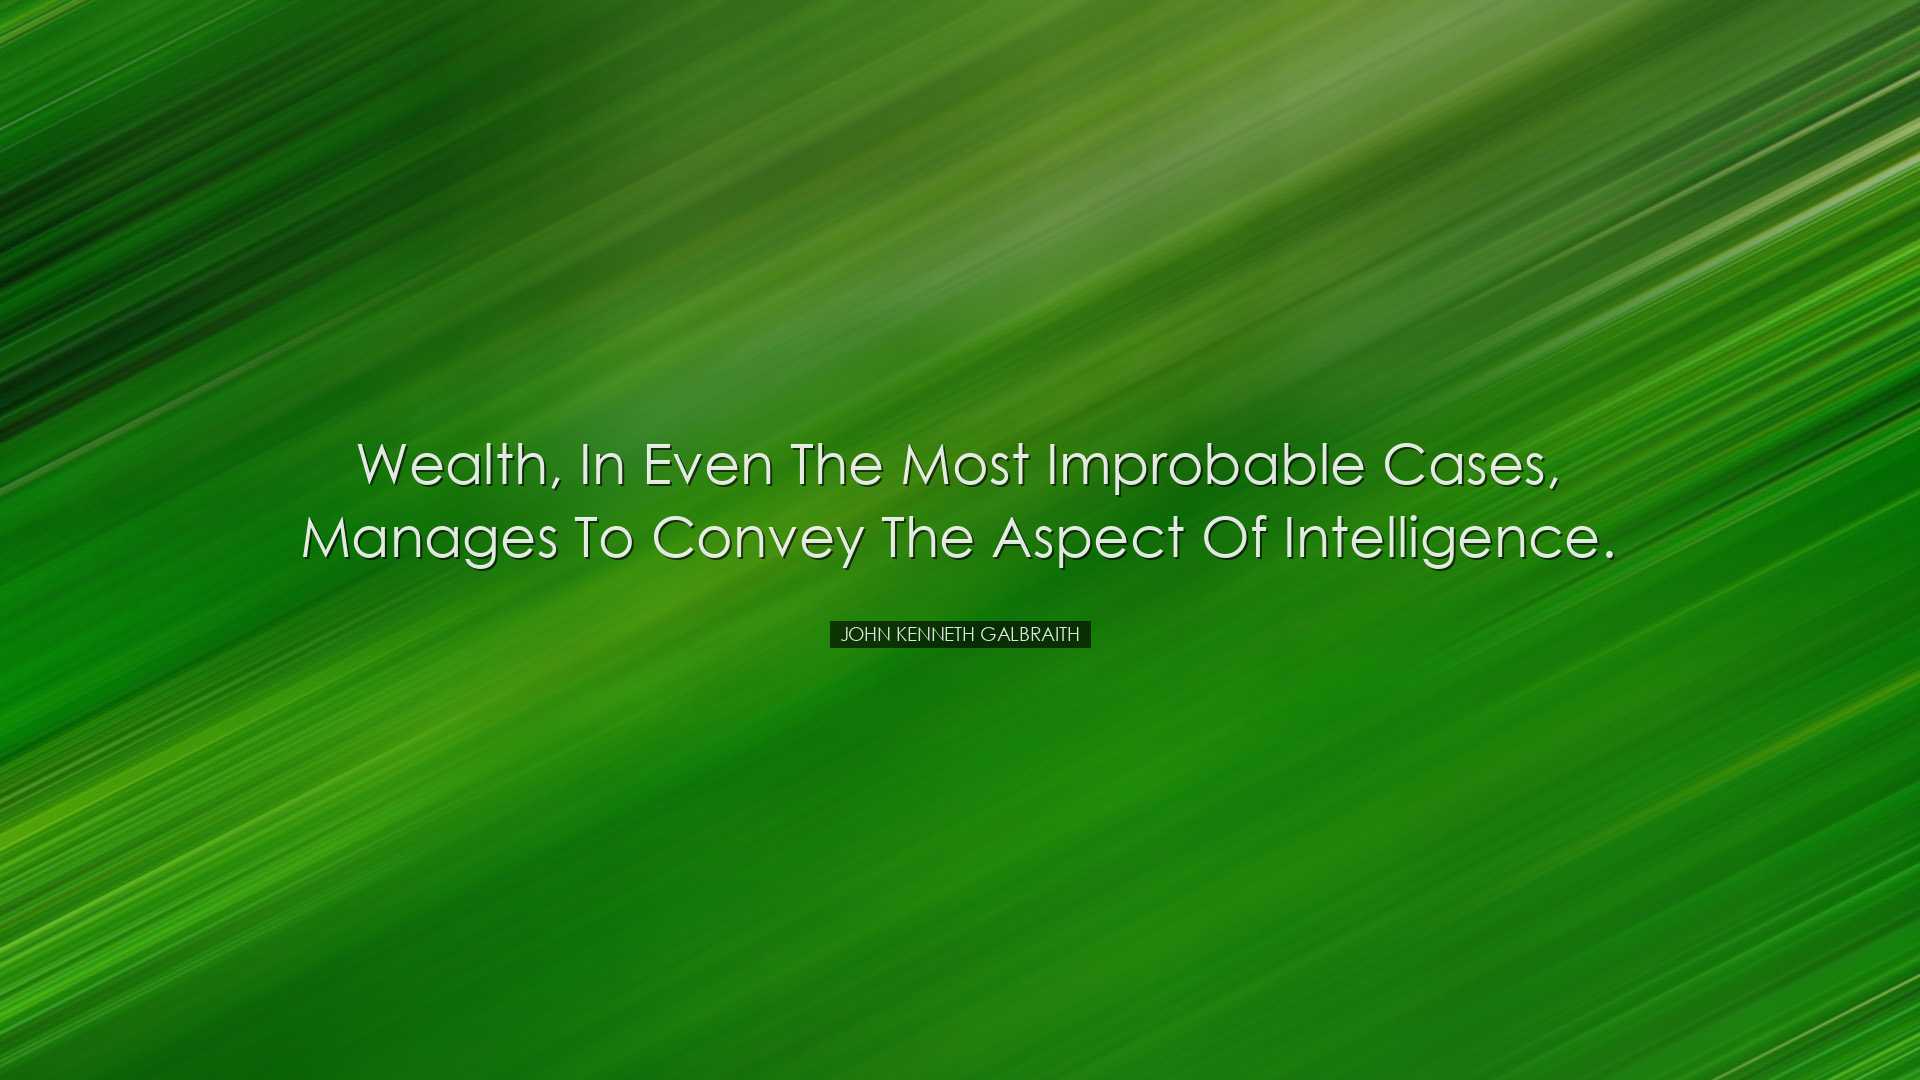 Wealth, in even the most improbable cases, manages to convey the a